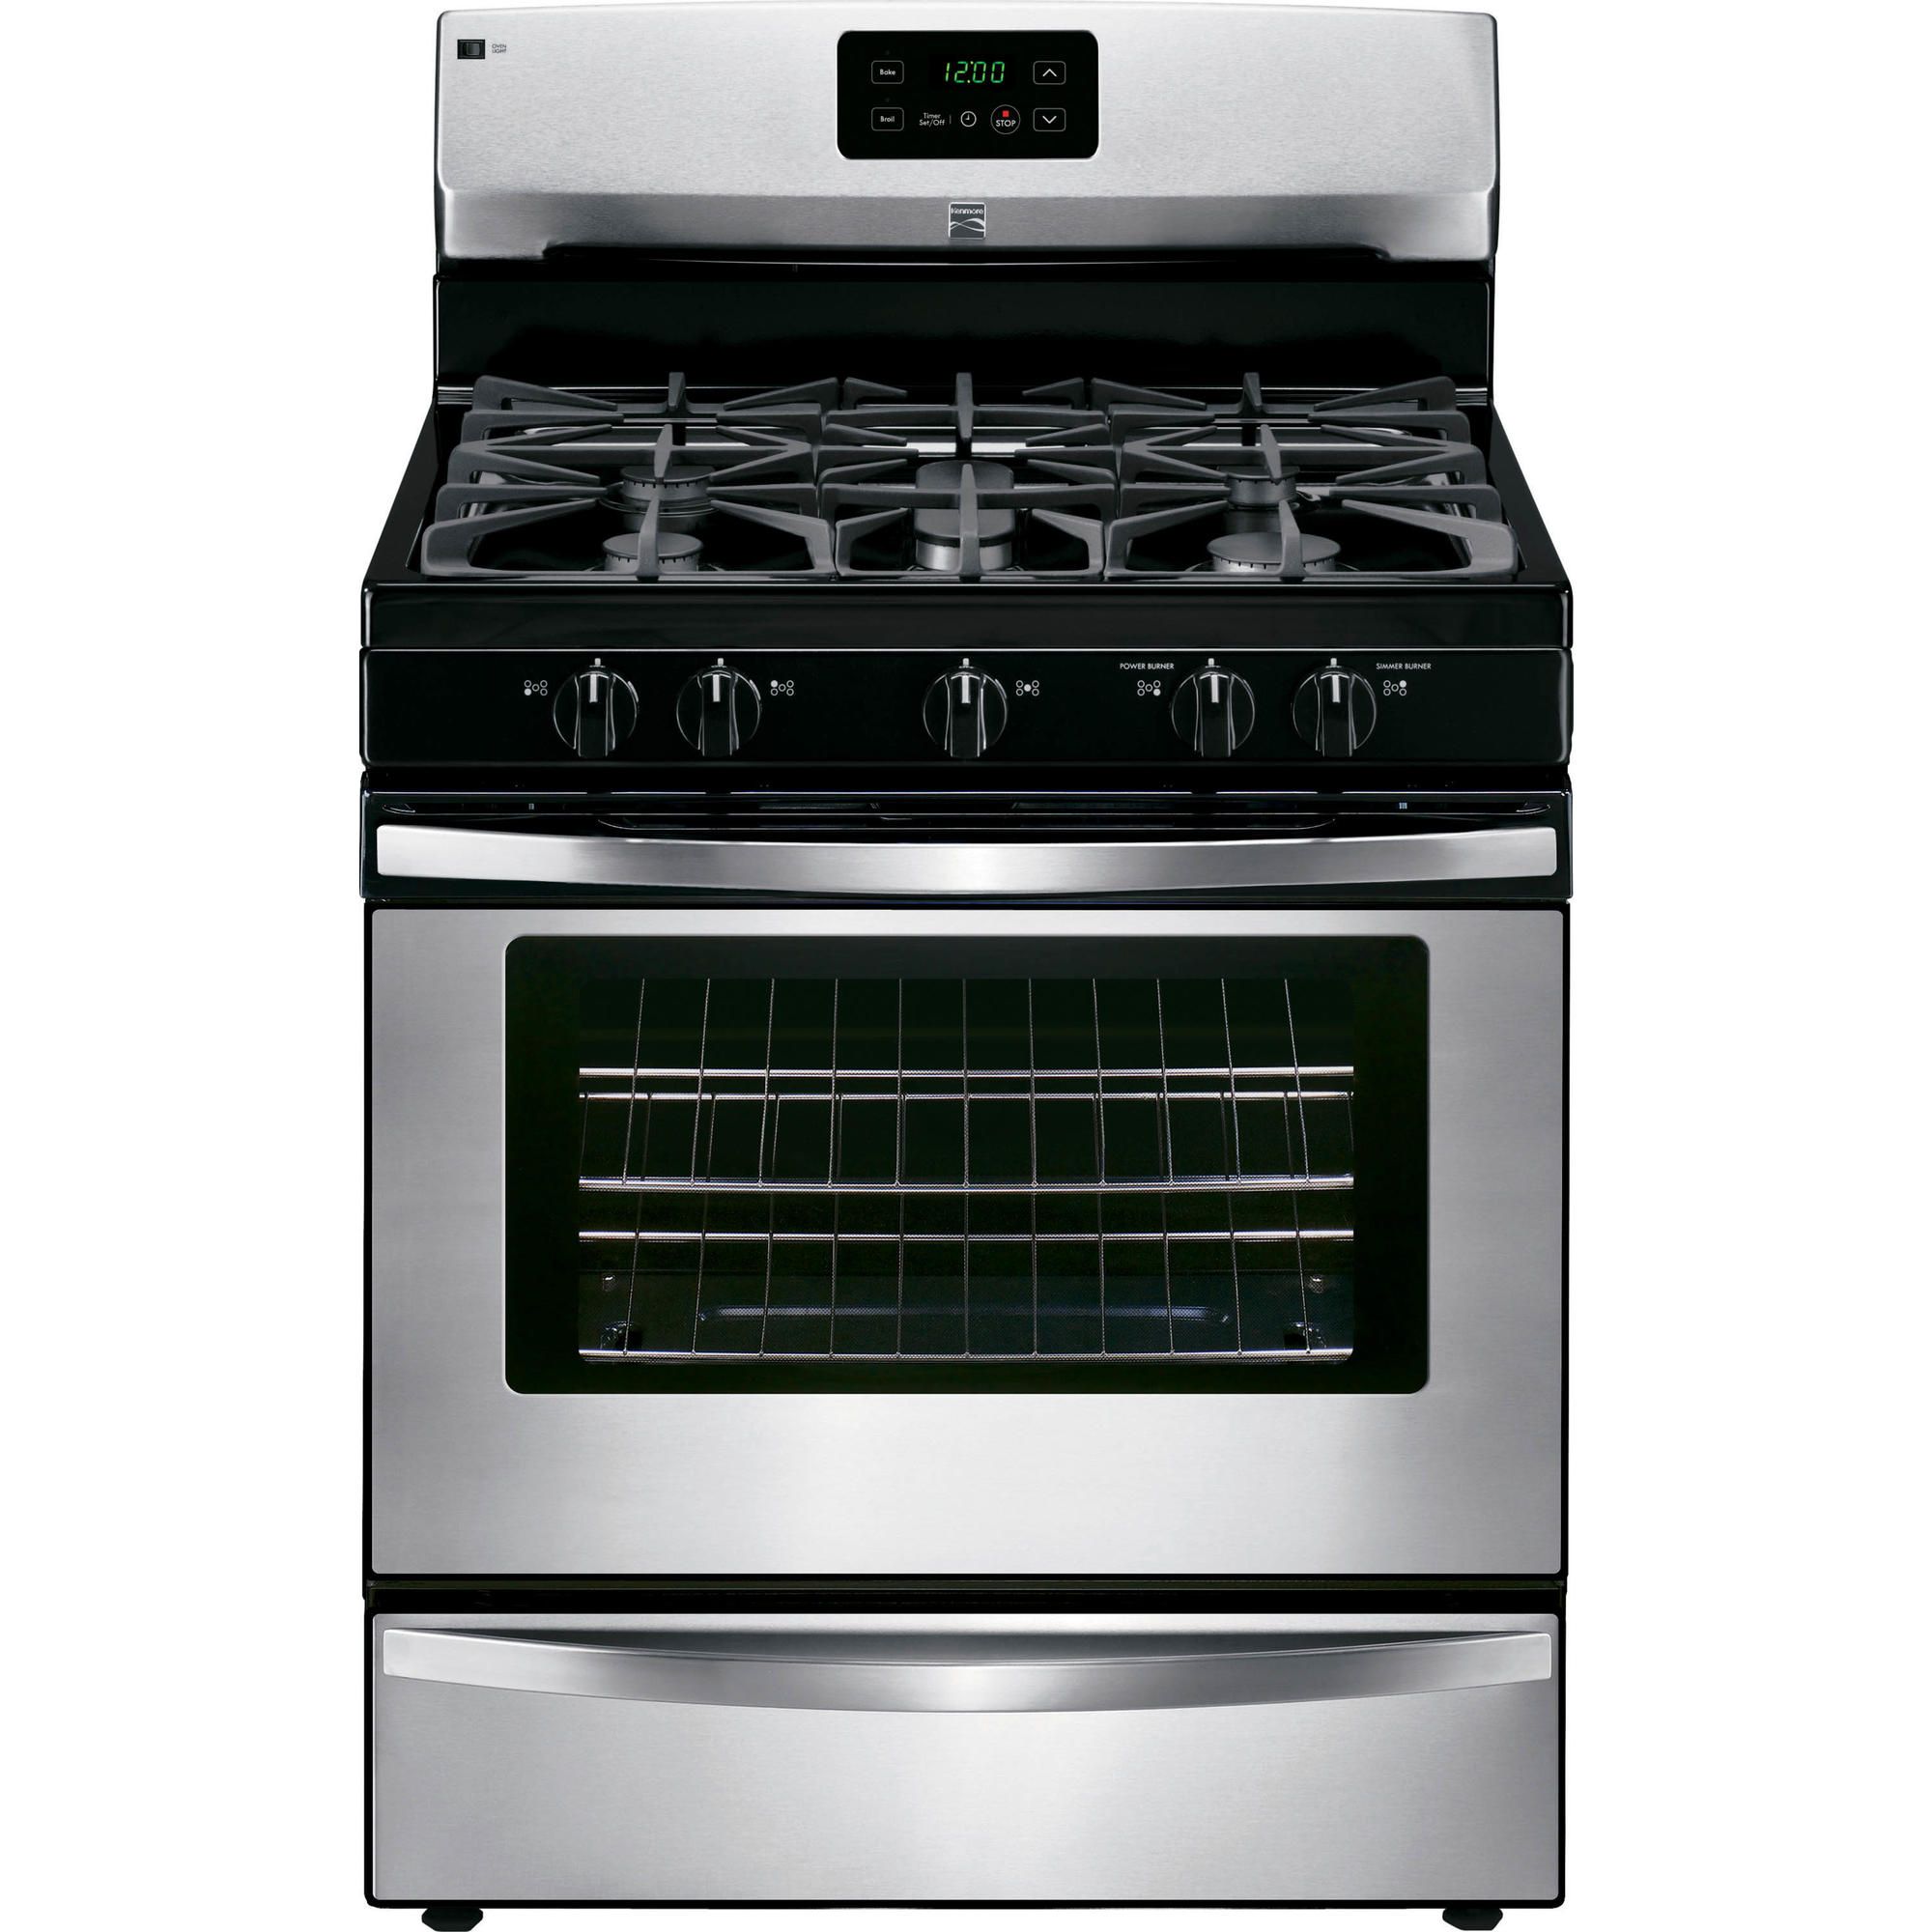 Which microwave is best to go over a gas range?